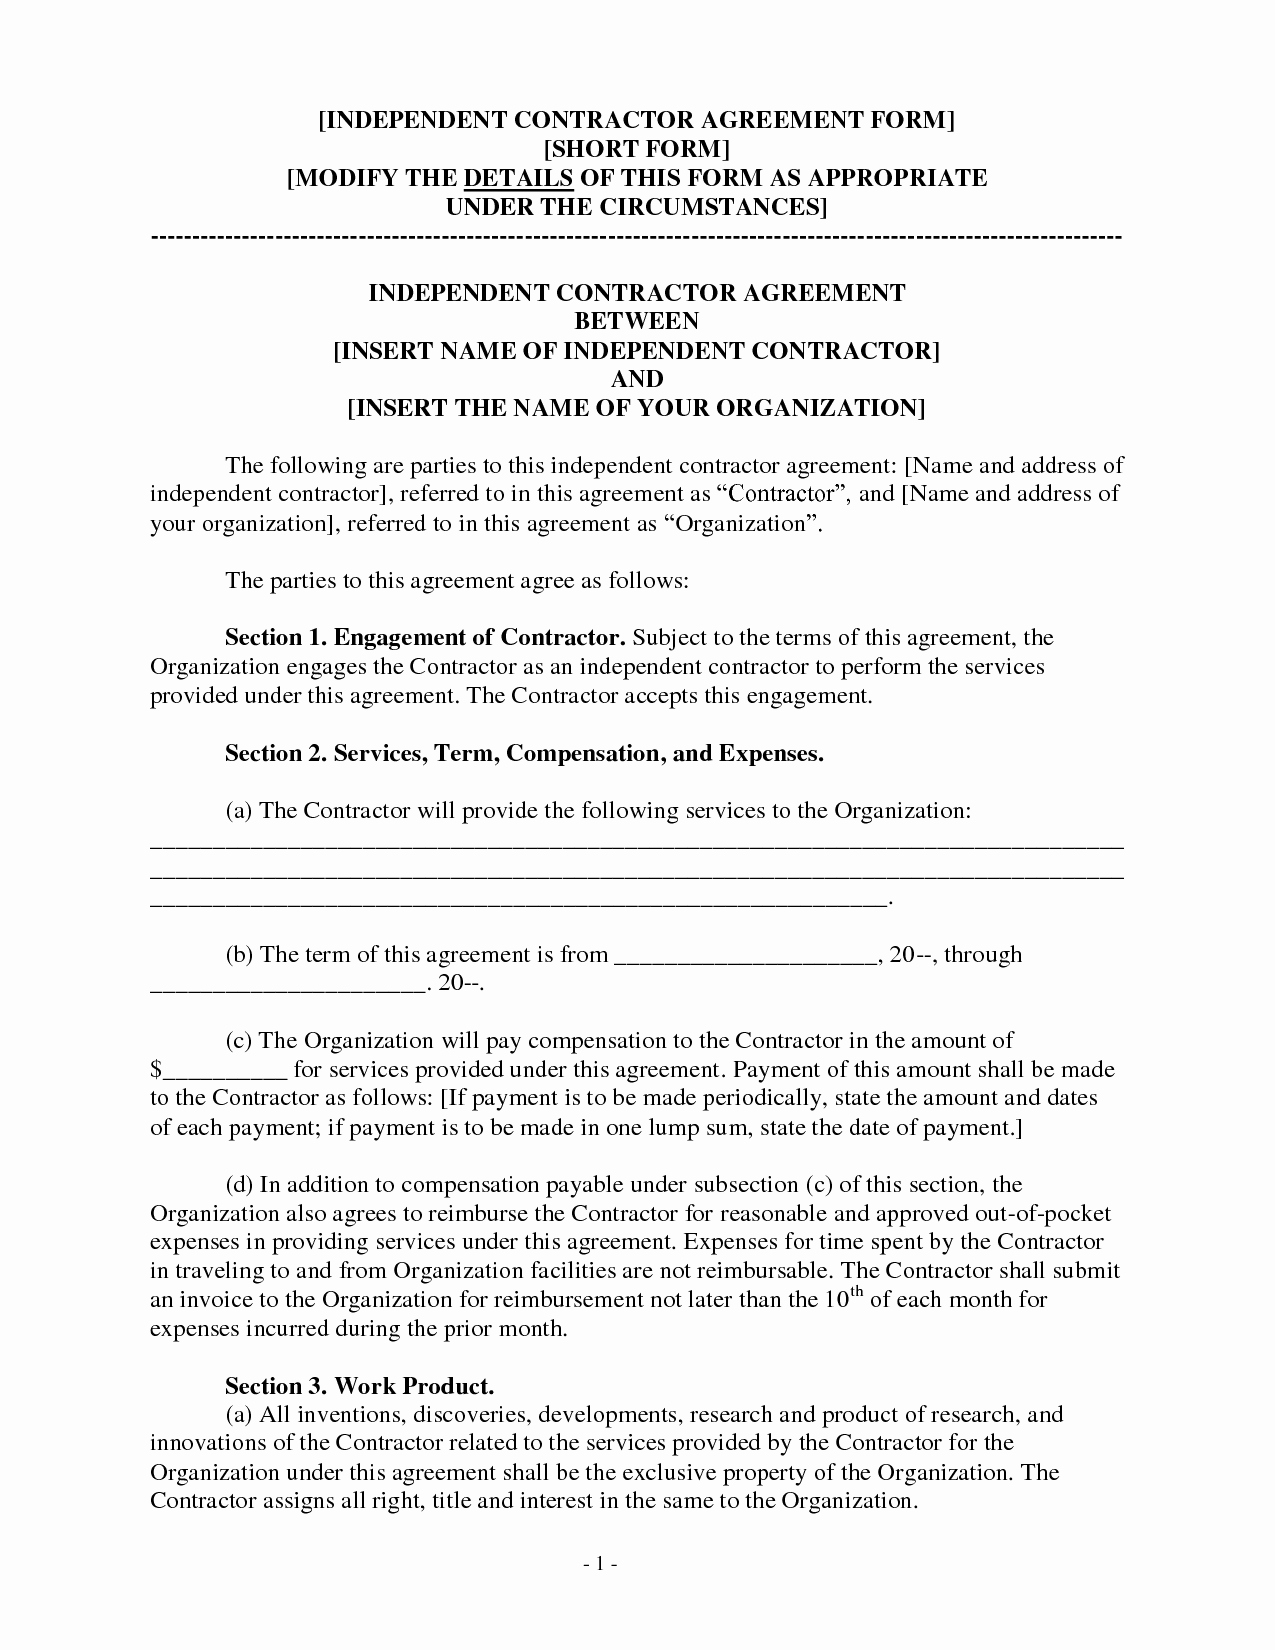 Independent Contractor Agreement Pdf Awesome Independent Contractor Agreement form